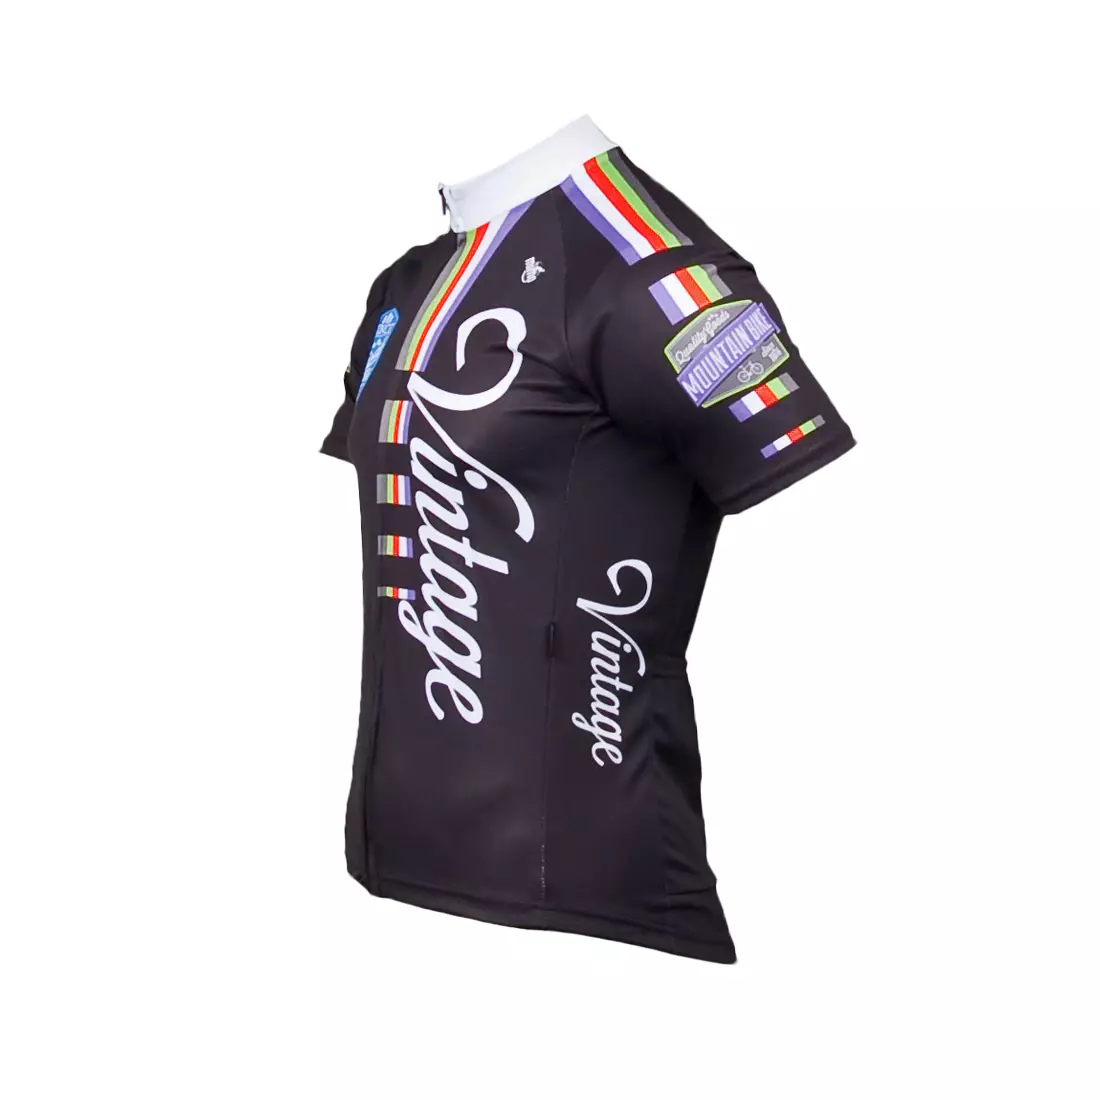 MikeSPORT DESIGN - VINTAGE - men's cycling jersey